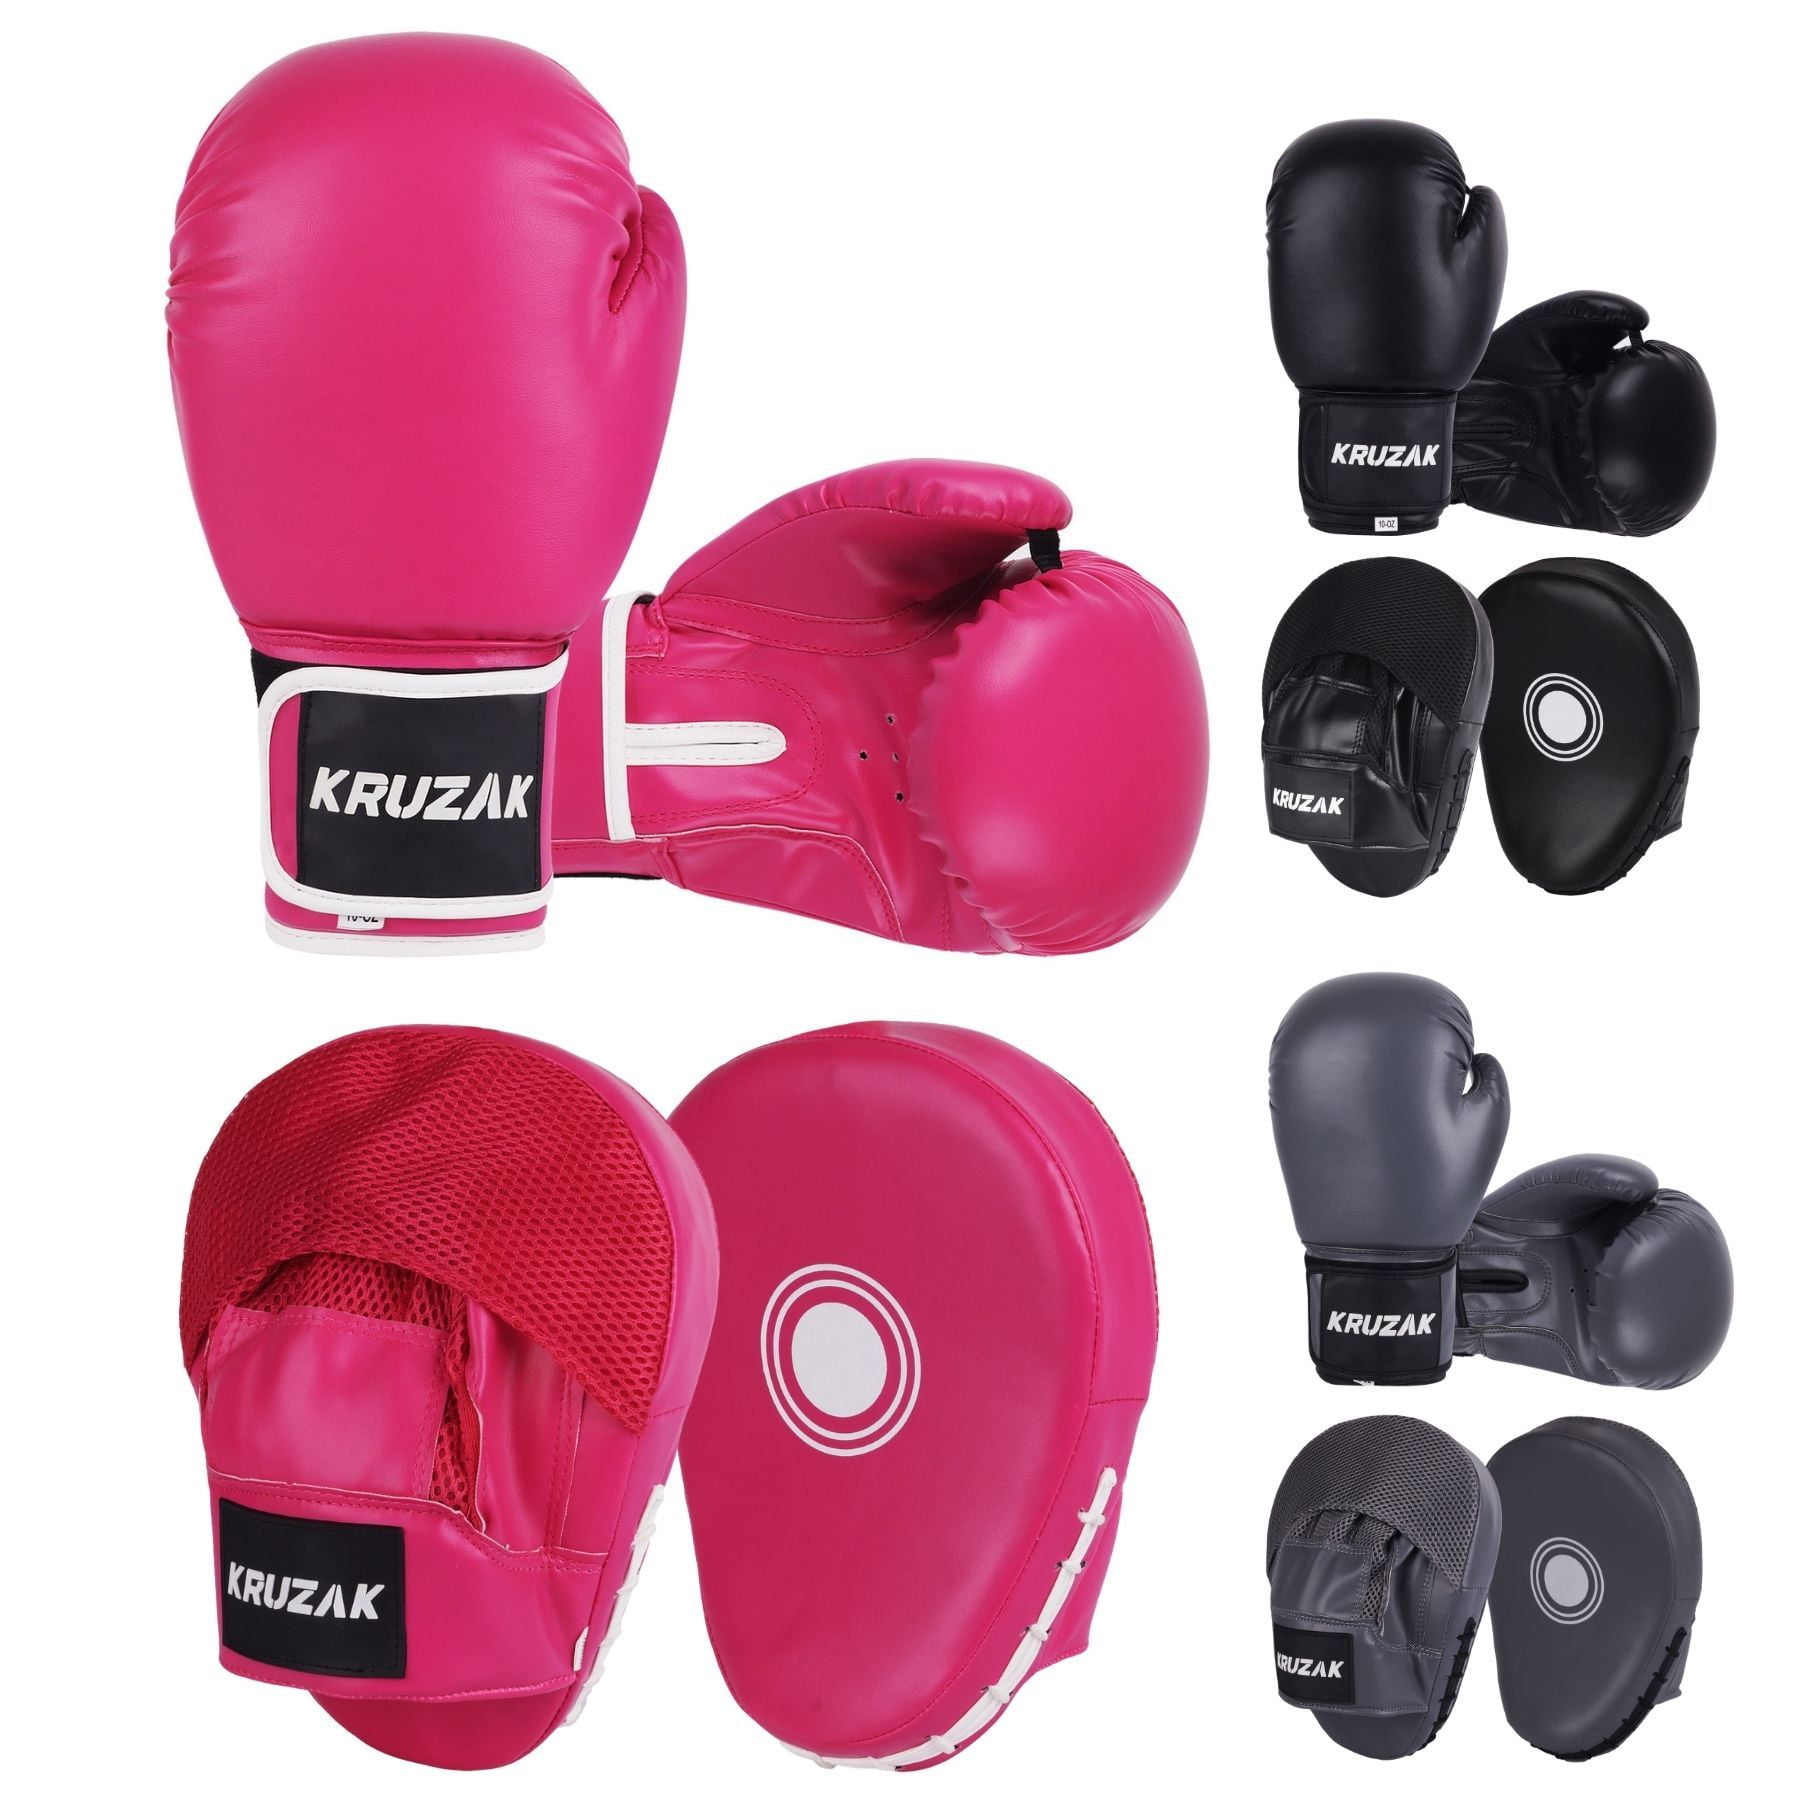 RDX Boxing Focus Pads Hook & Jab Mitts Thai Kick MMA Training Punch Bag Curved W 